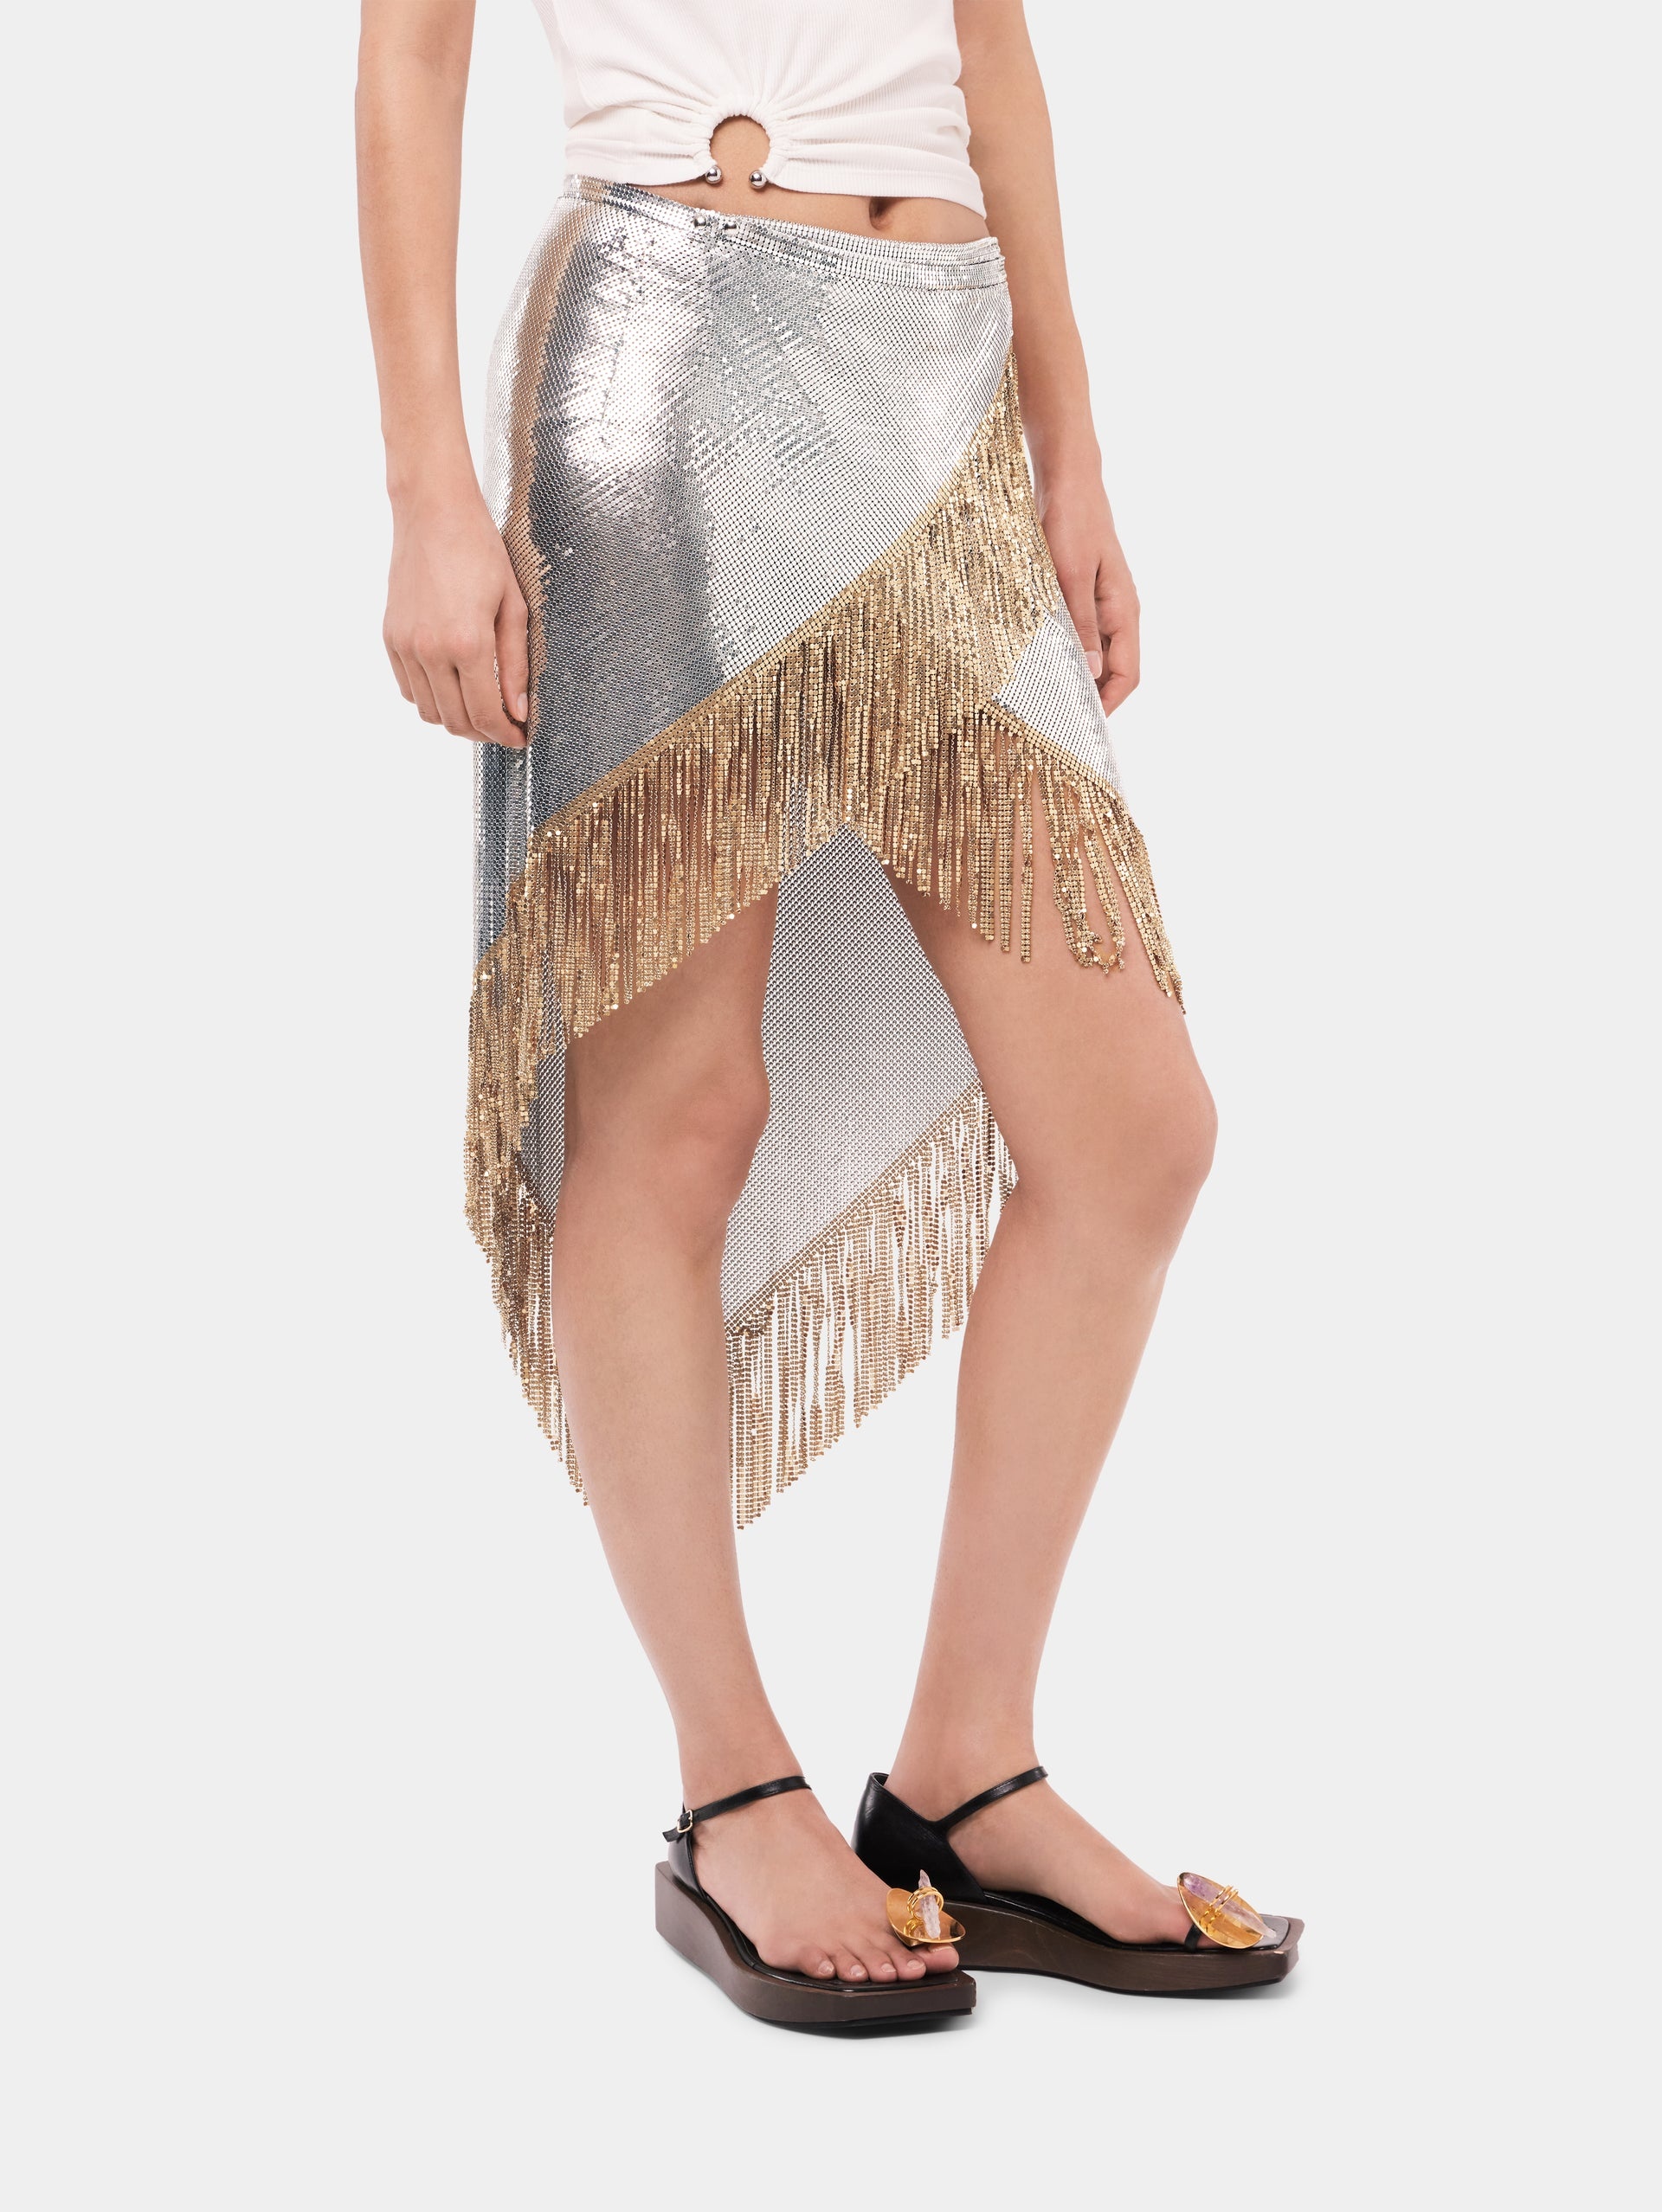 ASYMETRICAL CHAINMAIL SKIRT WITH GOLDEN METALIC FRINGES - 3